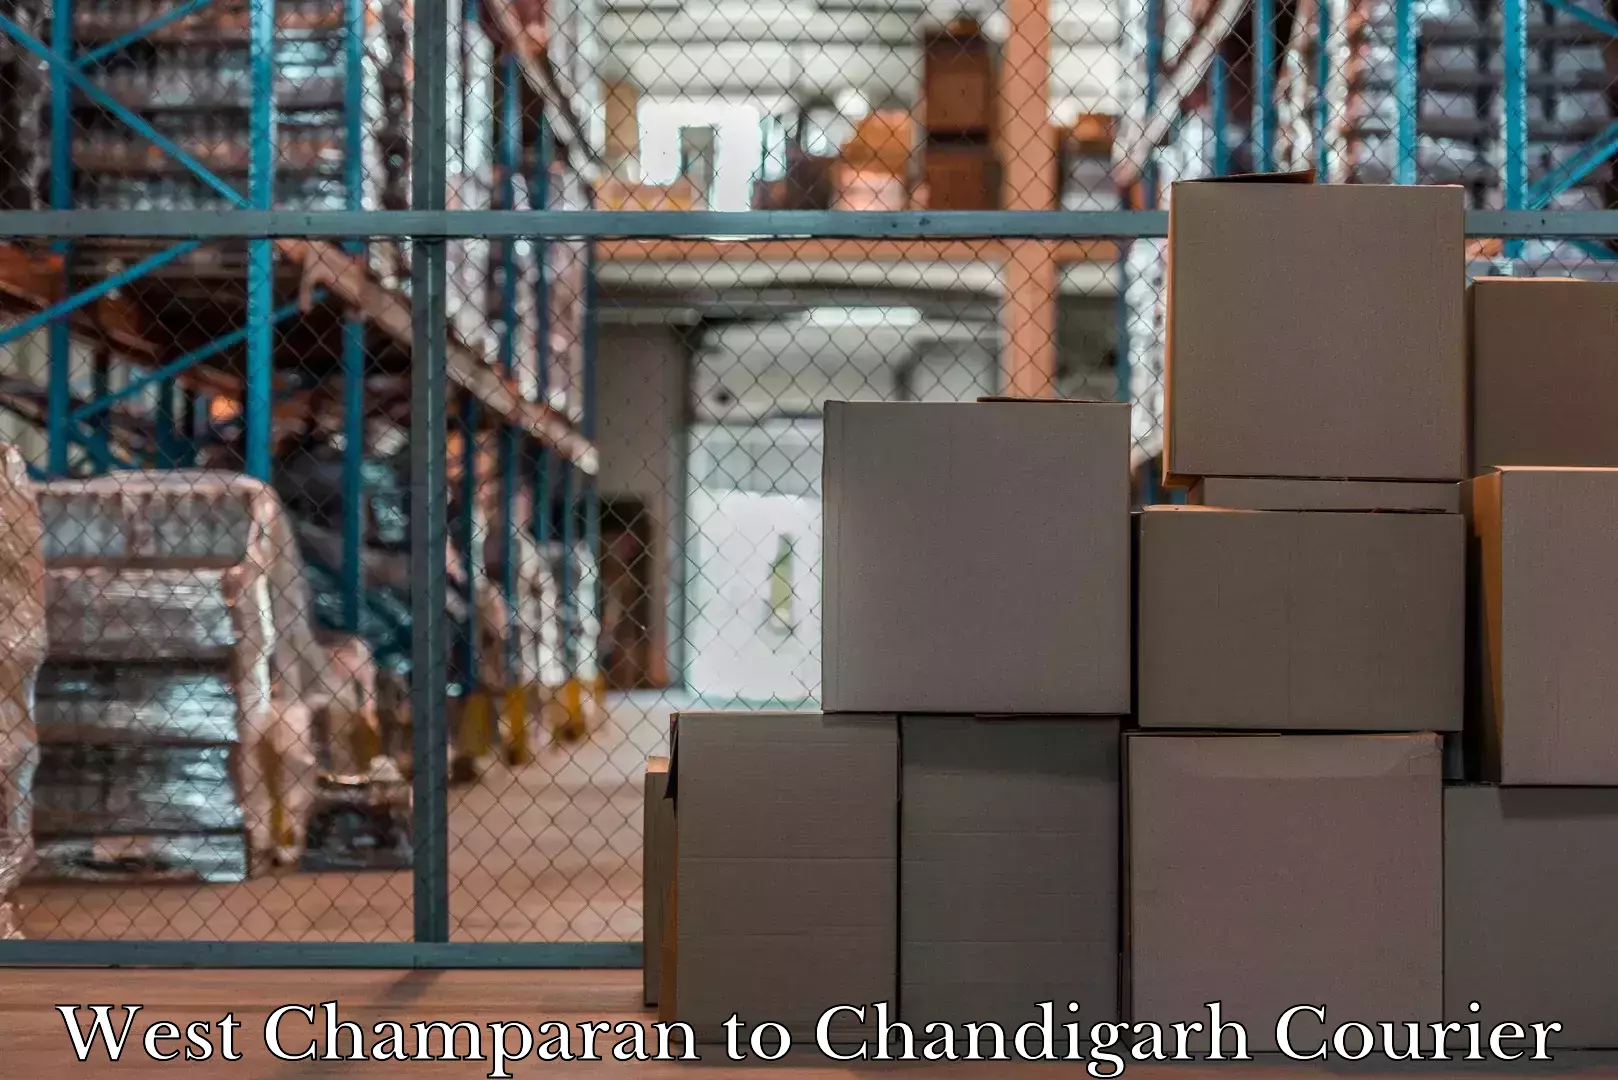 Baggage relocation service West Champaran to Chandigarh